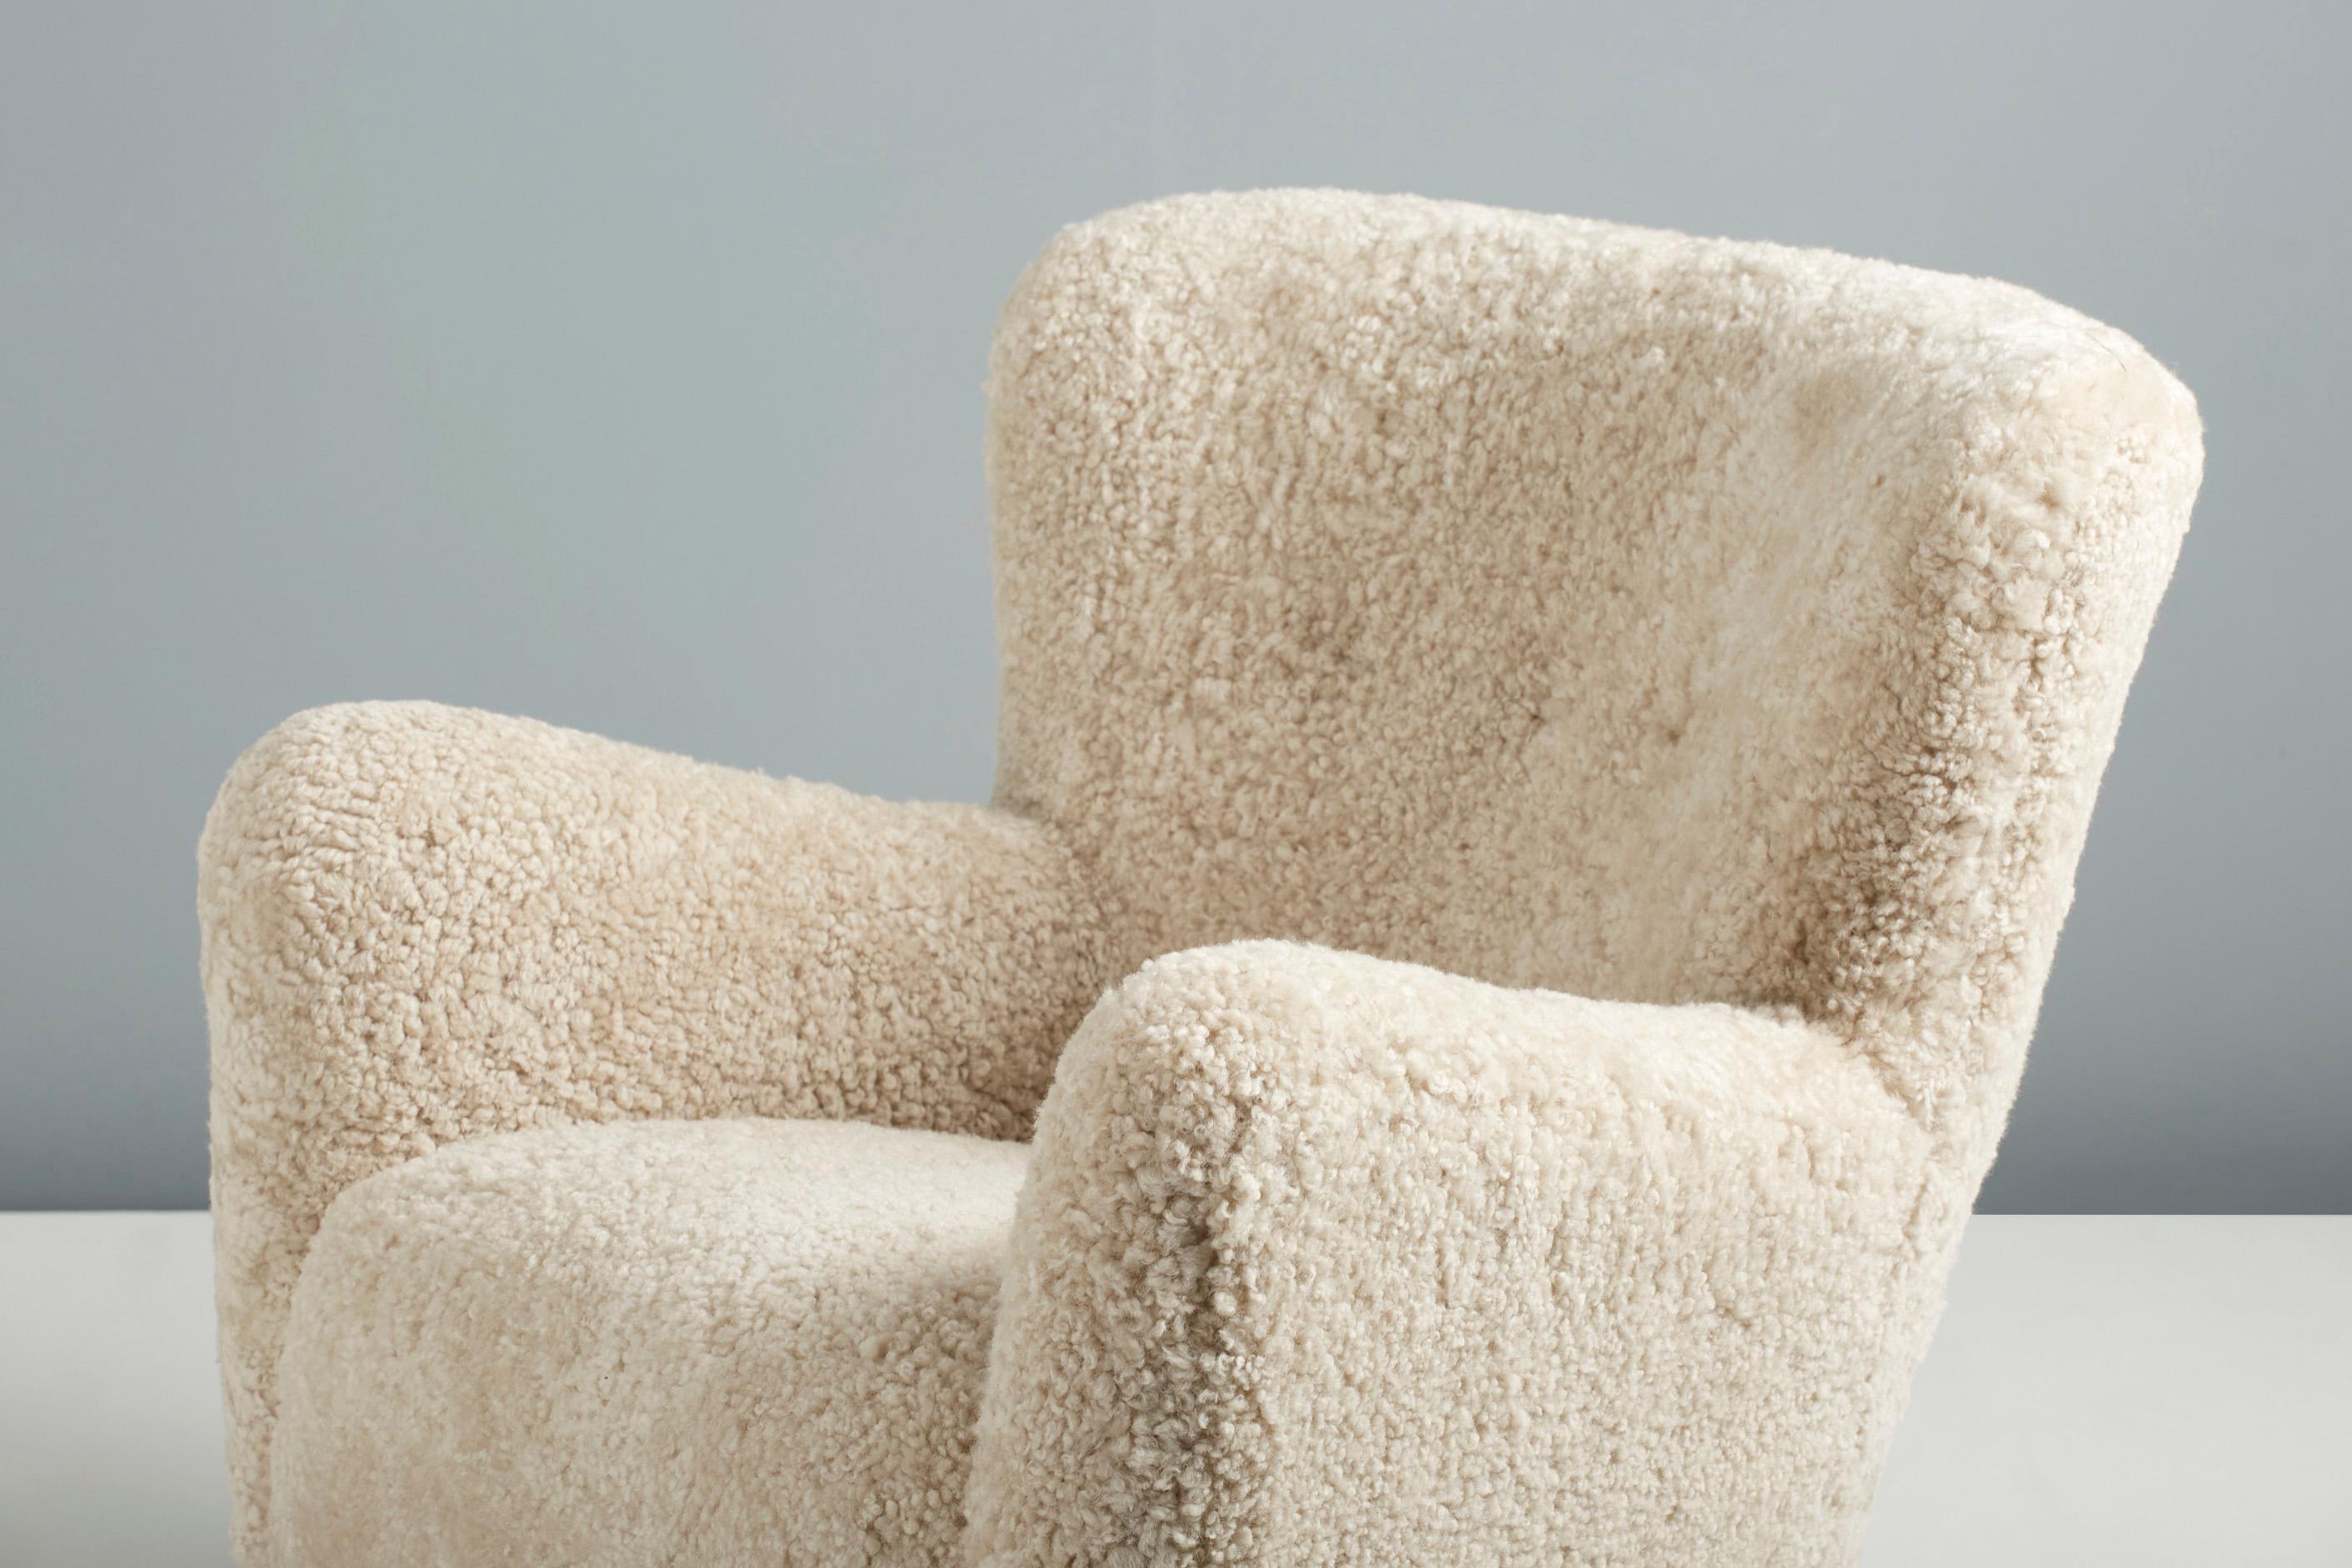 Pair of Custom Made Ryo Sheepskin Lounge Chairs In New Condition For Sale In London, England